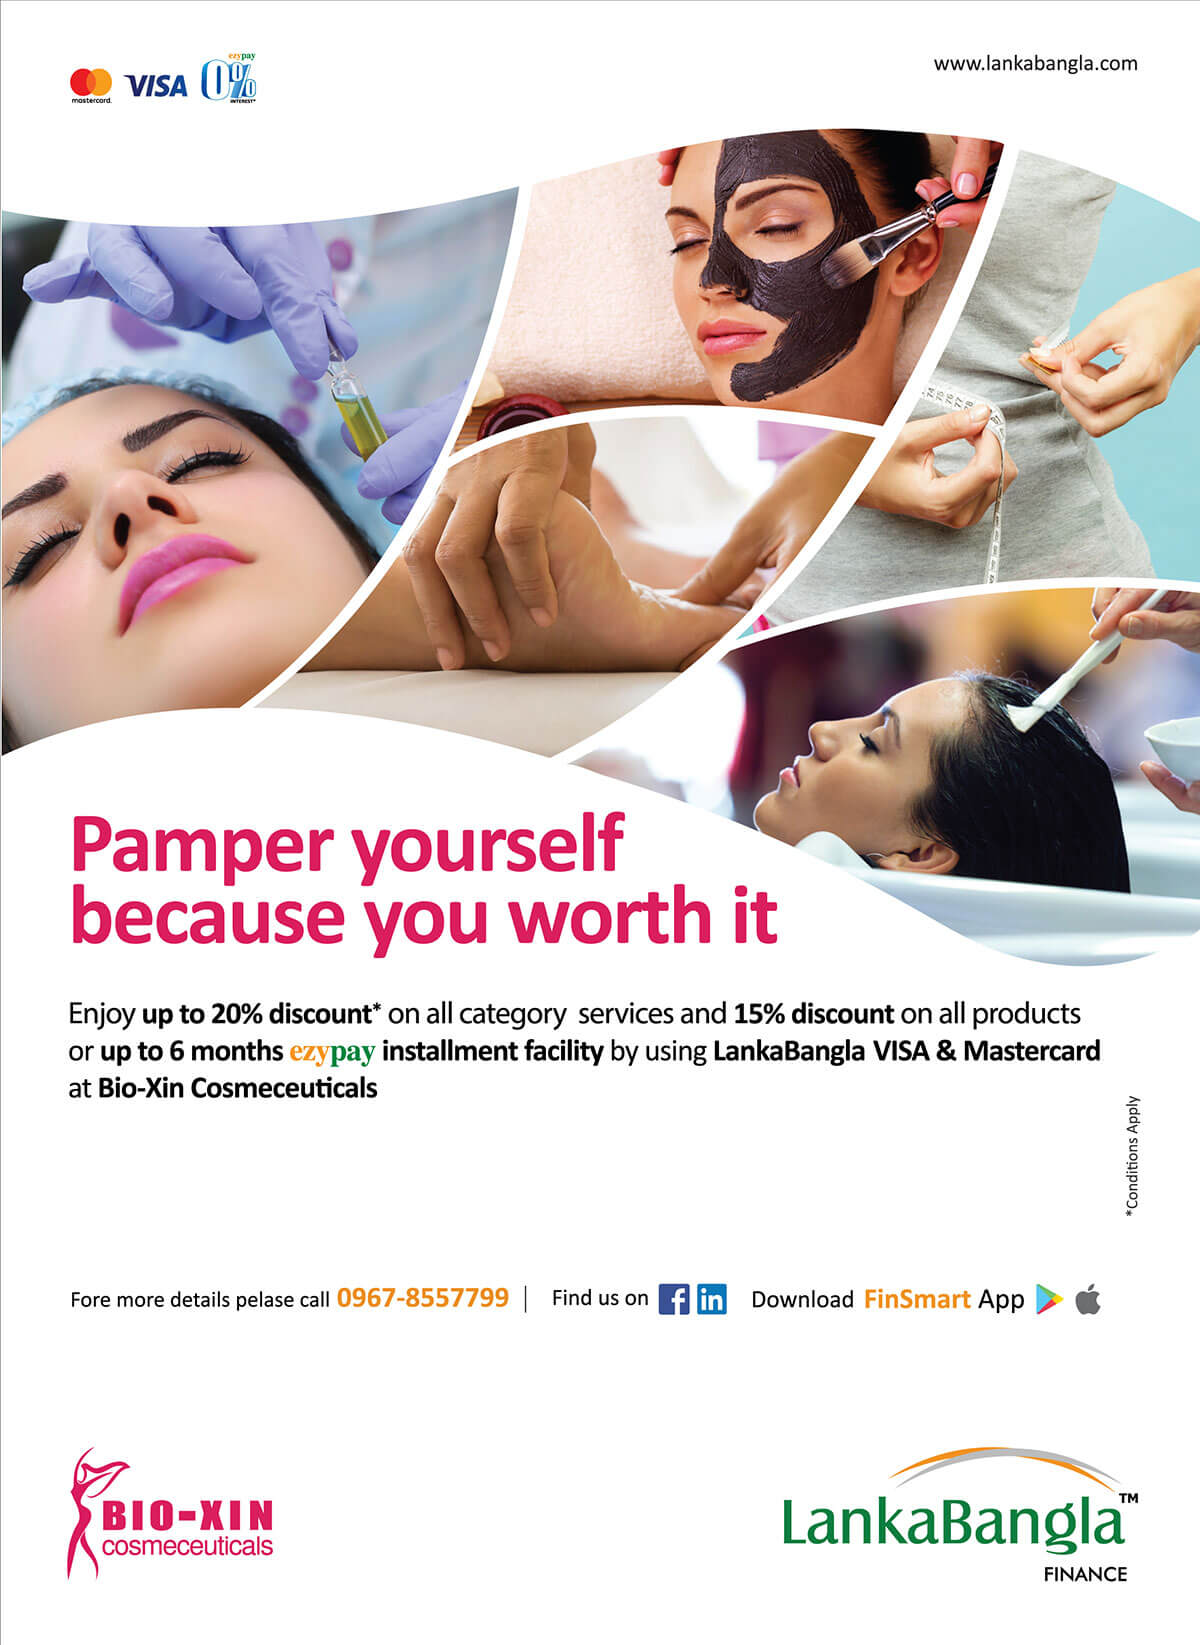 Pamper yourself because you worth it